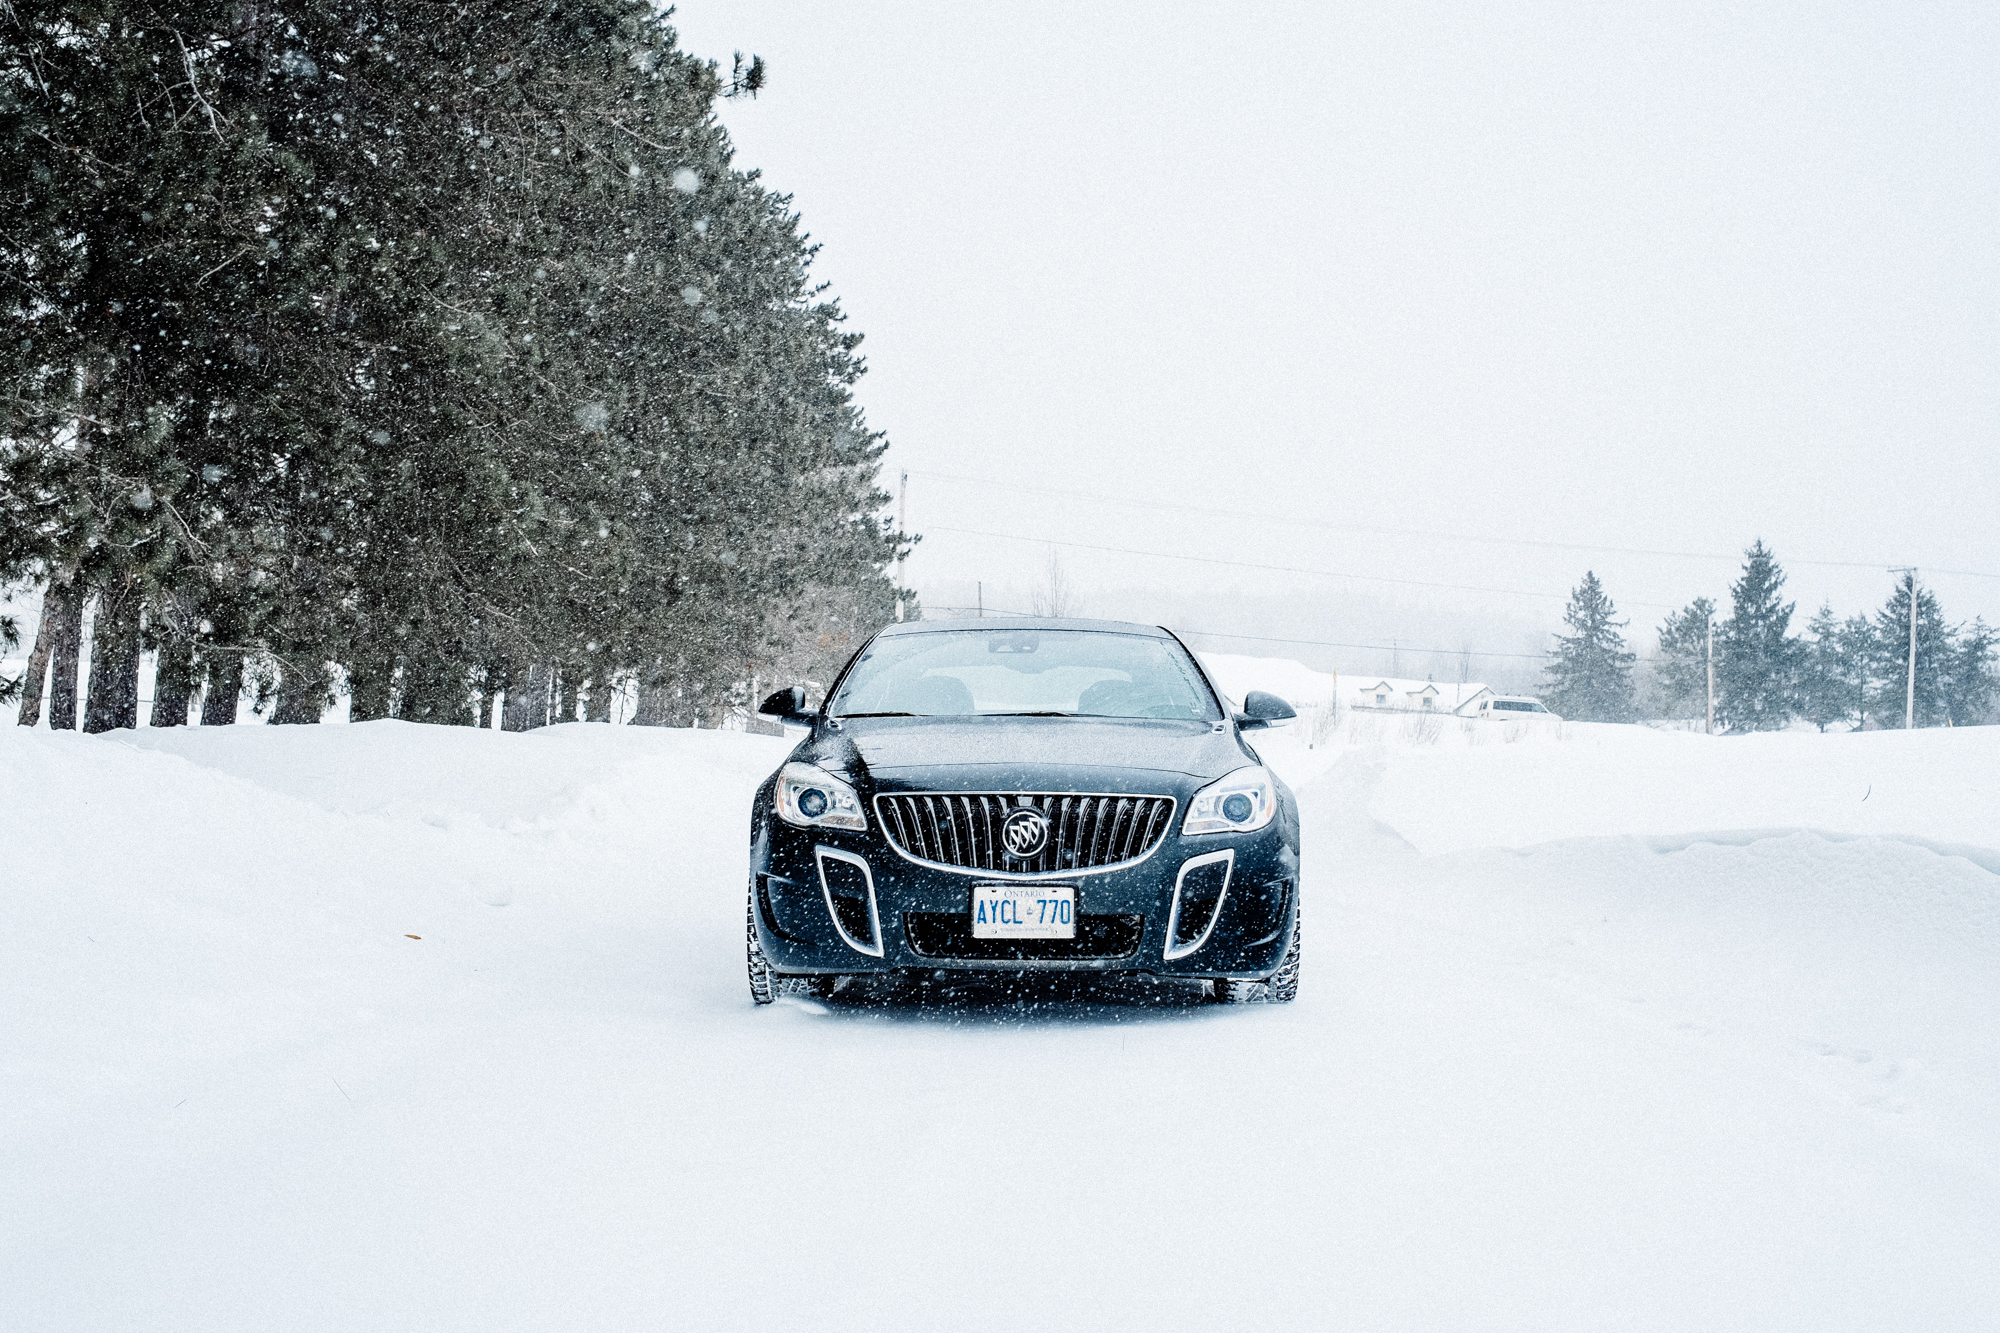 Auto Review: 2014 Buick Regal finds its place in the snow